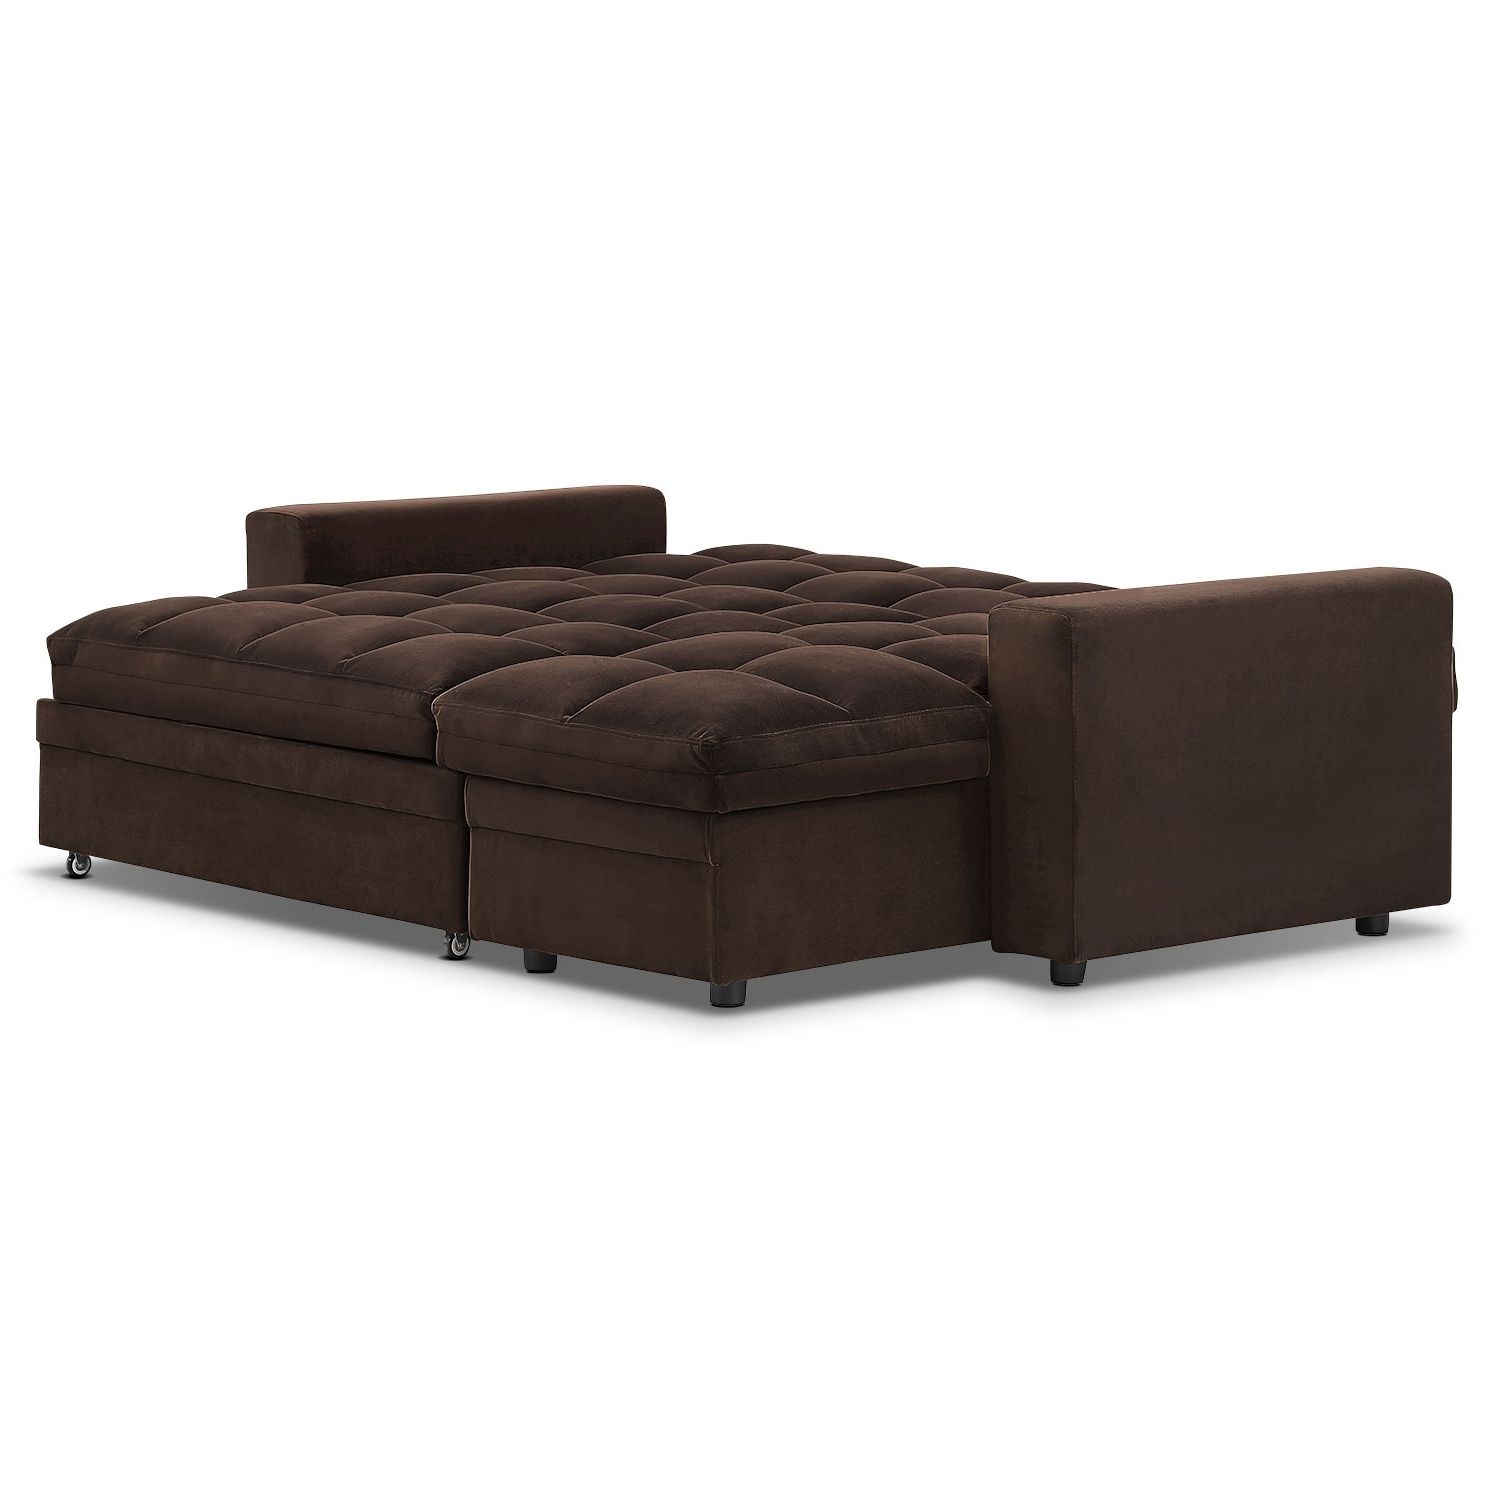 Preferred Chaise Sofa Beds Regarding Metro Chaise Sofa Bed With Storage – Brown (View 15 of 15)